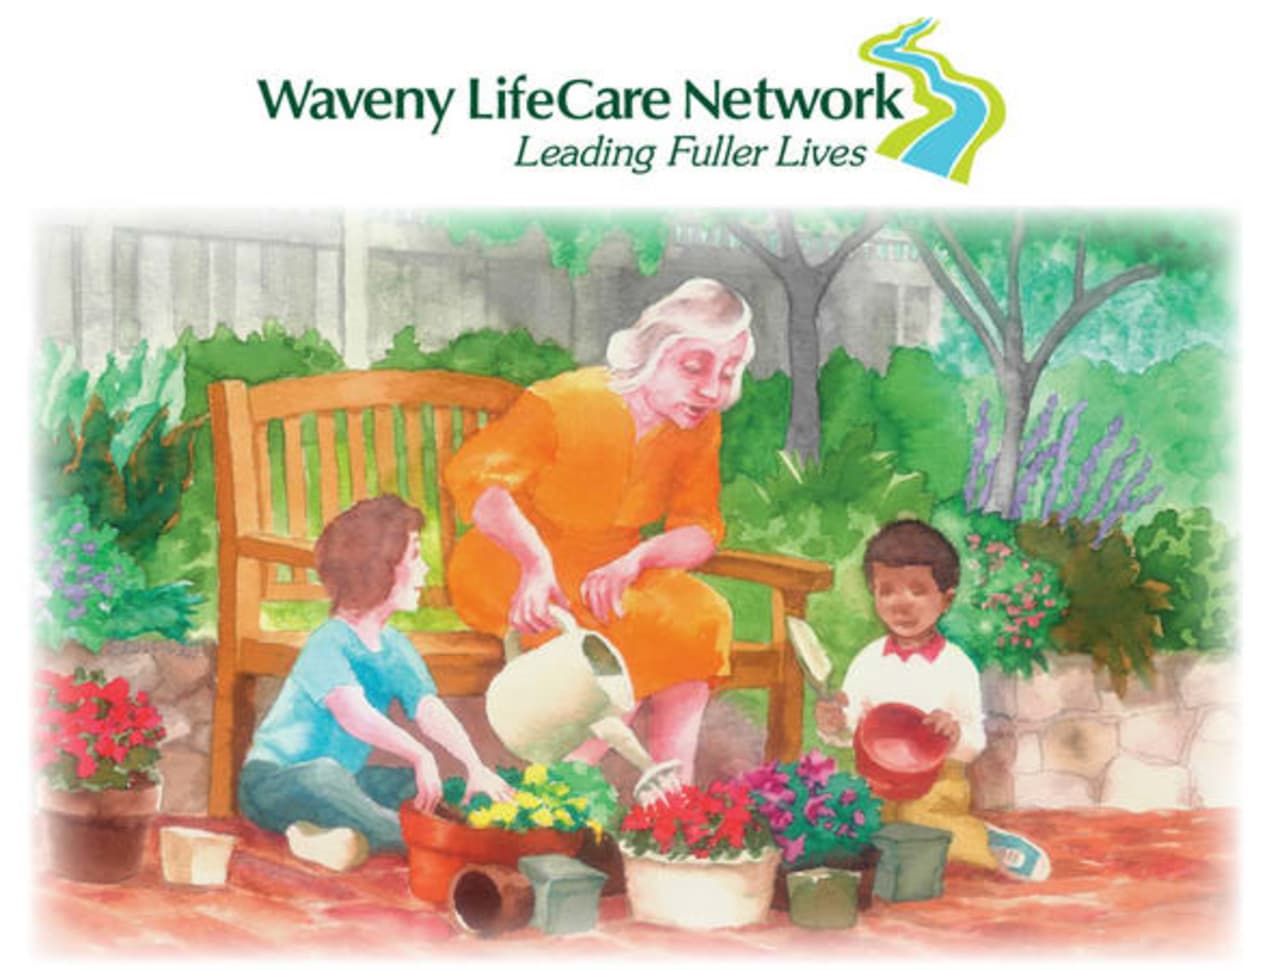 Waveny LifeCare Network has a toll-free number 1-855-WAVENY-1 to assist older residents. 